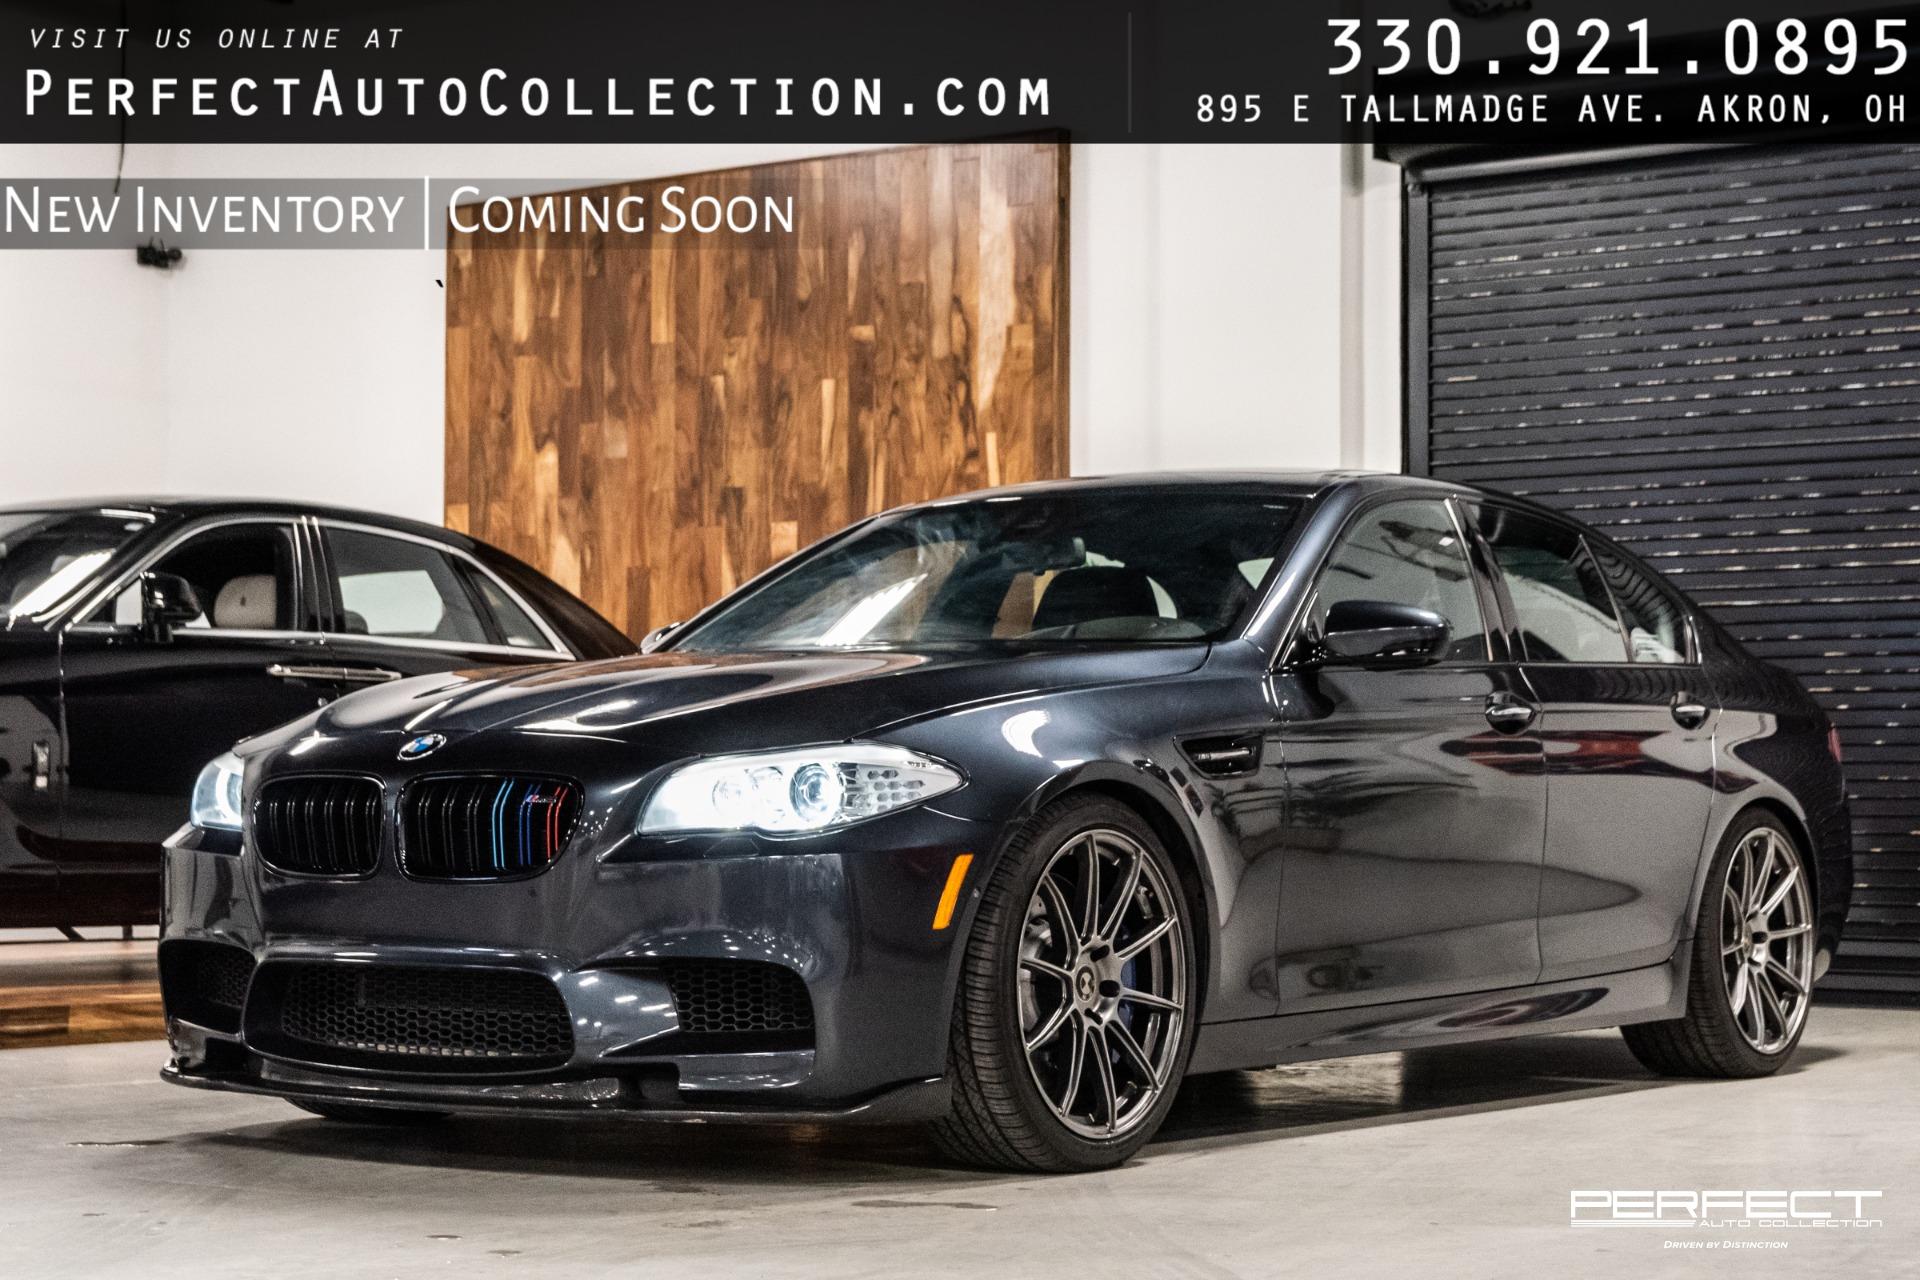 Used 2010 BMW M5 For Sale (Sold)  Momentum Motorcars Inc Stock